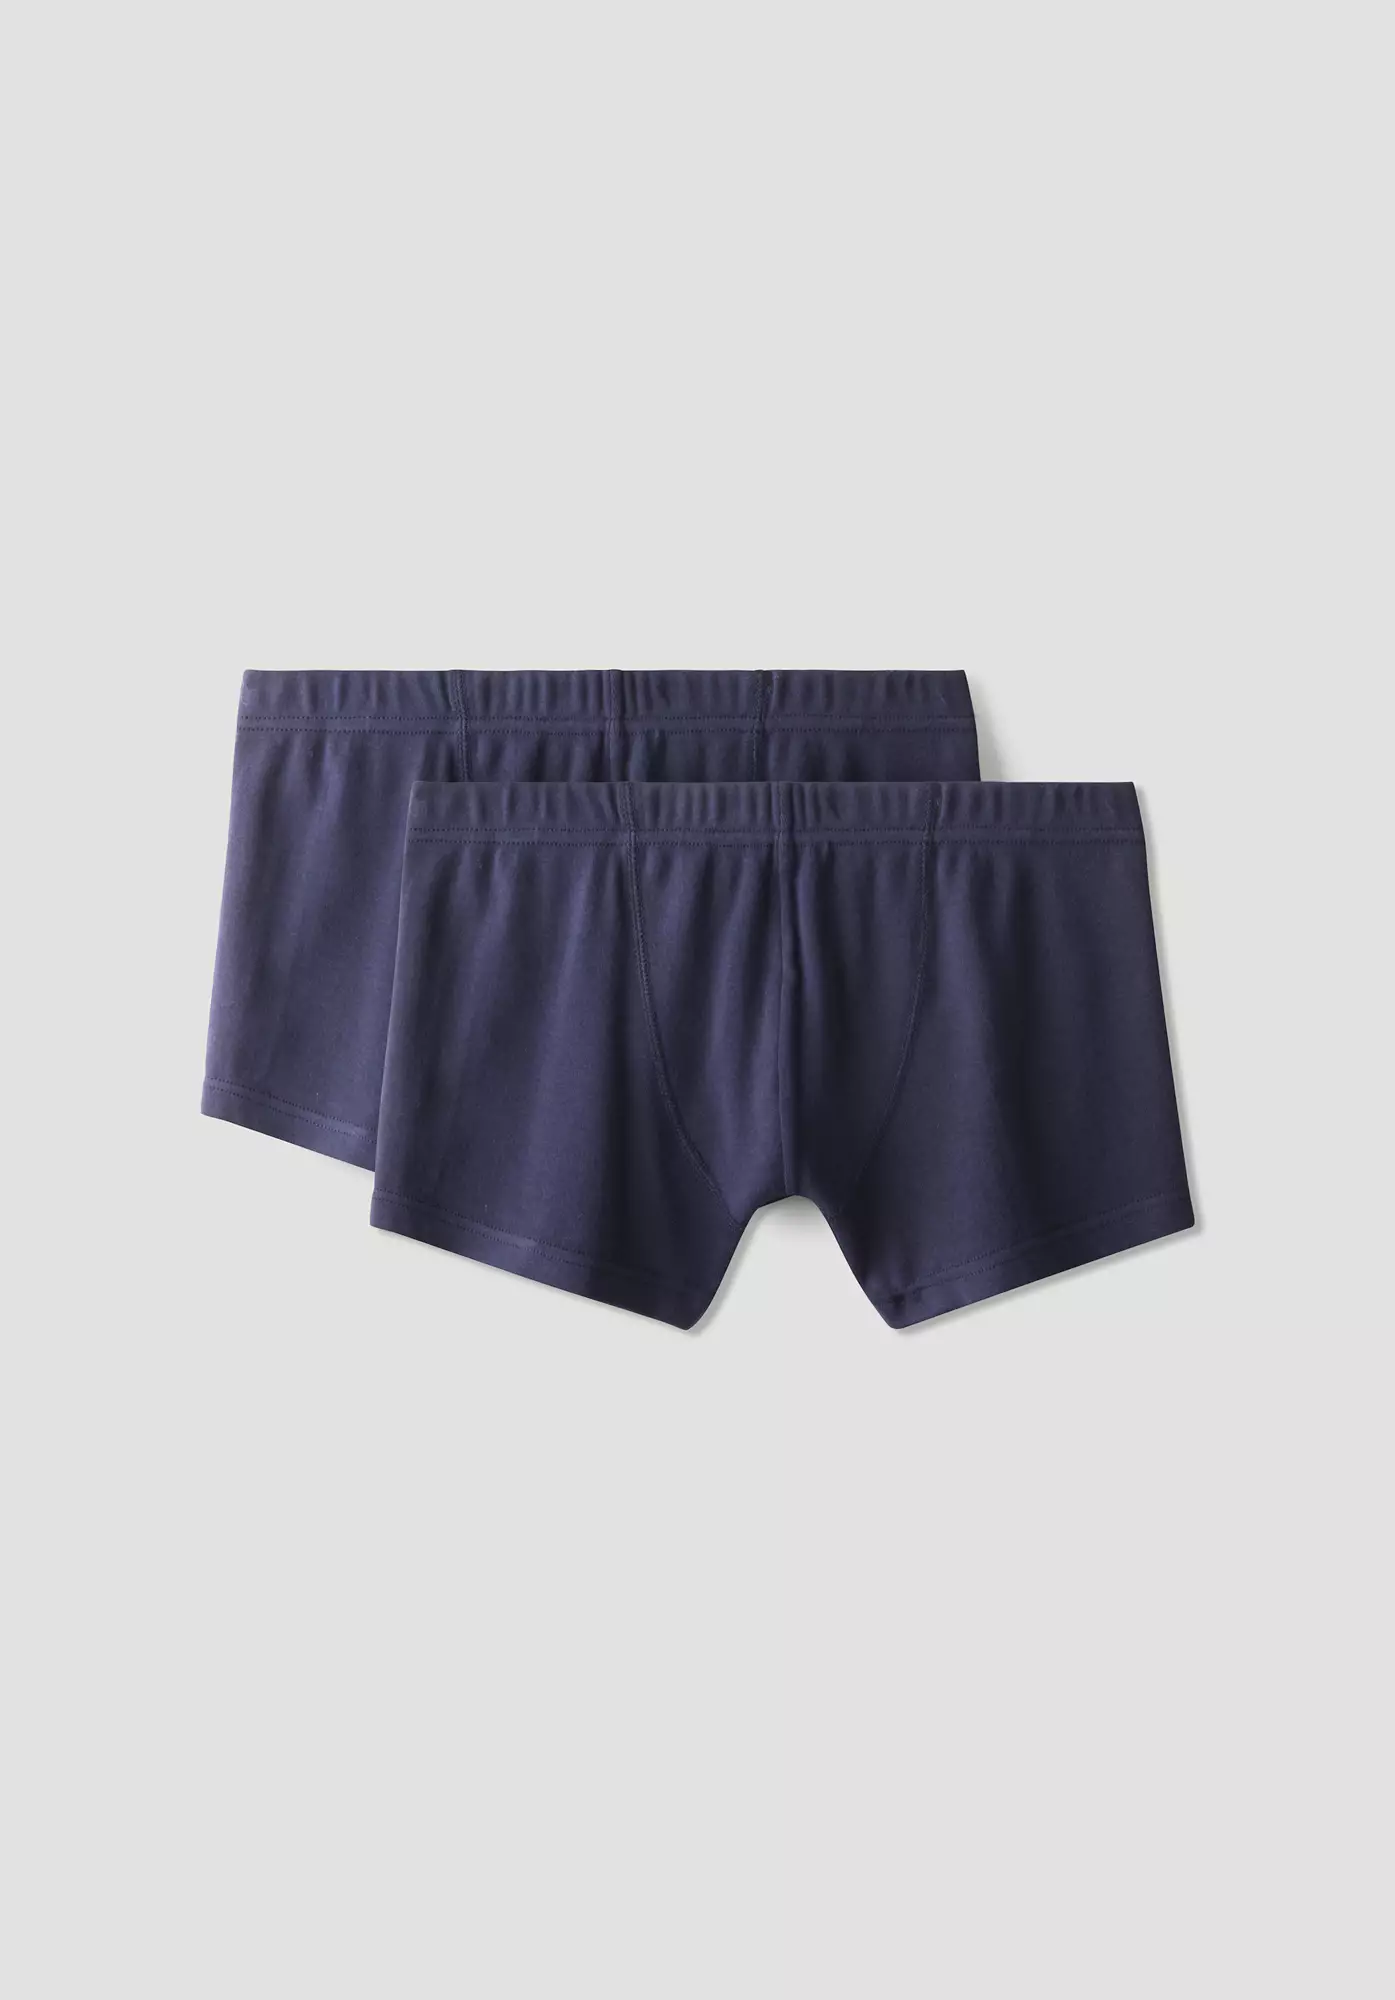 Pants PureDAILY in a set of 2 made of pure organic cotton - 3